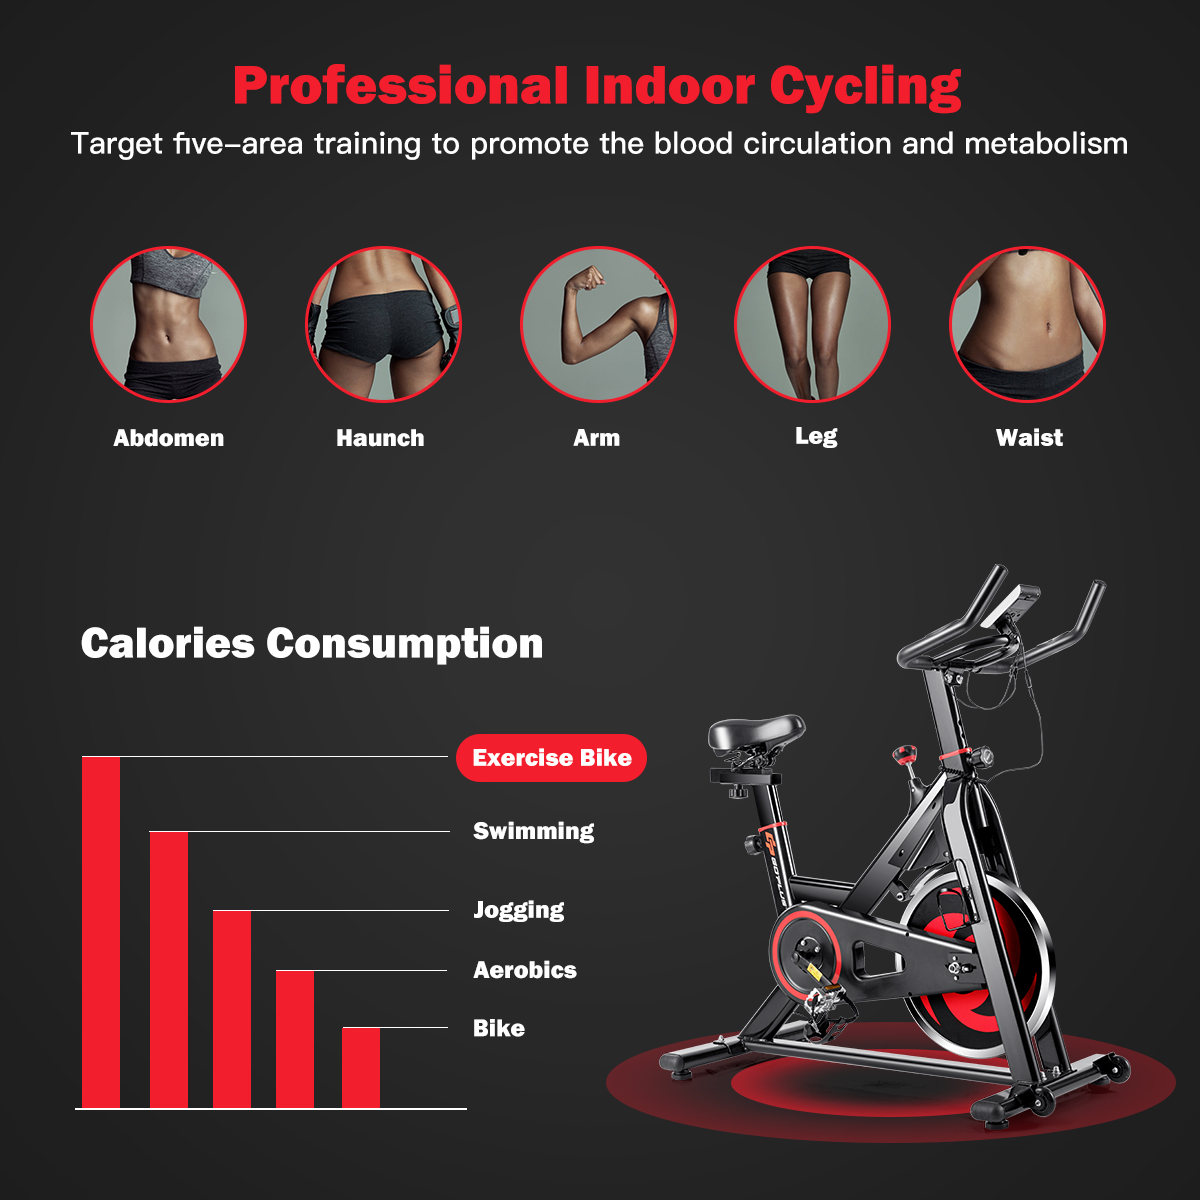 Stationary Exercise Magnetic Cycling Bike 30Lbs Flywheel Home Gym Cardio Workout - image 7 of 10